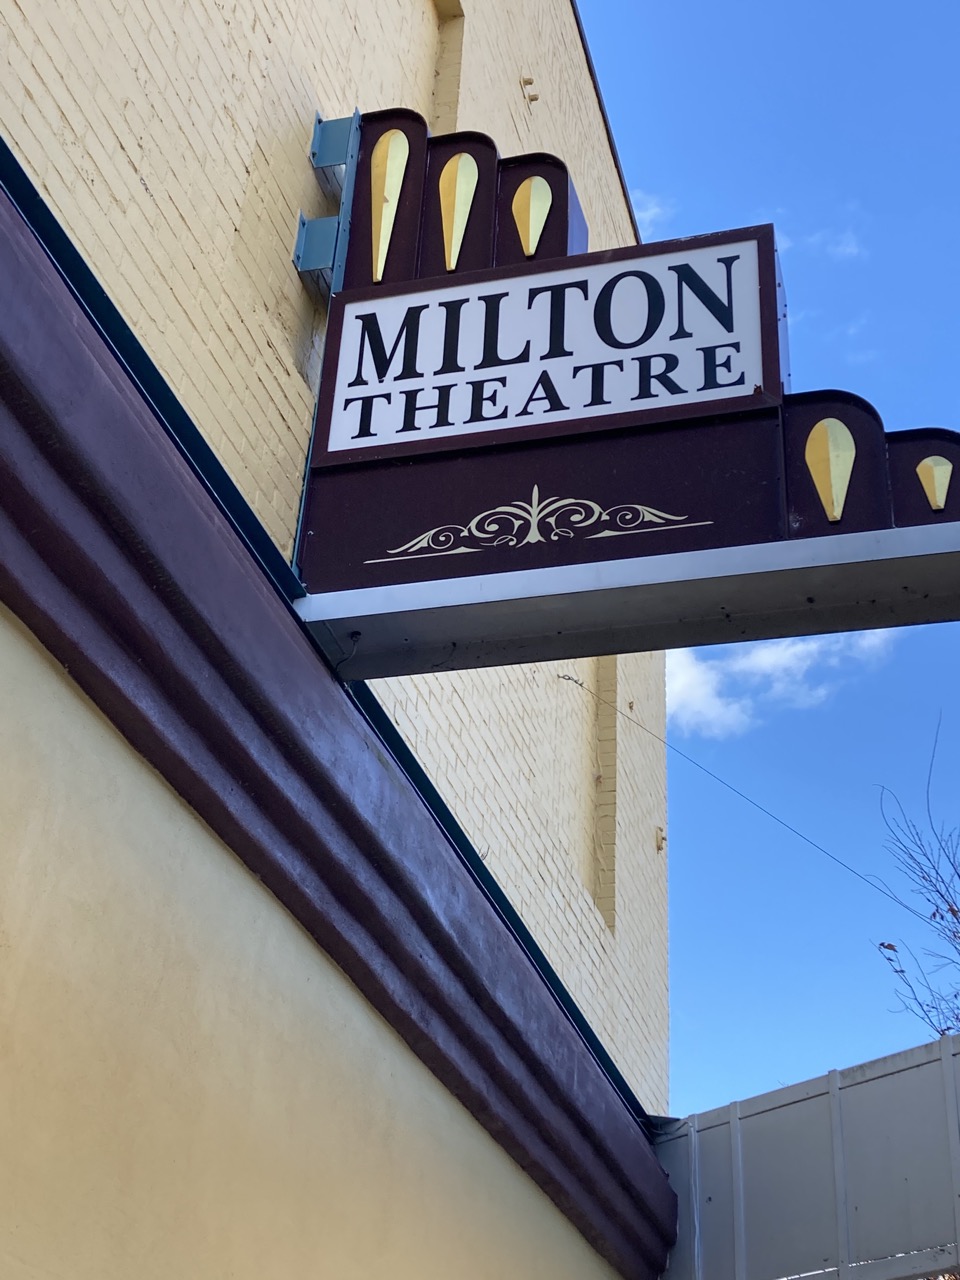 Milton Theatre Sign From Below